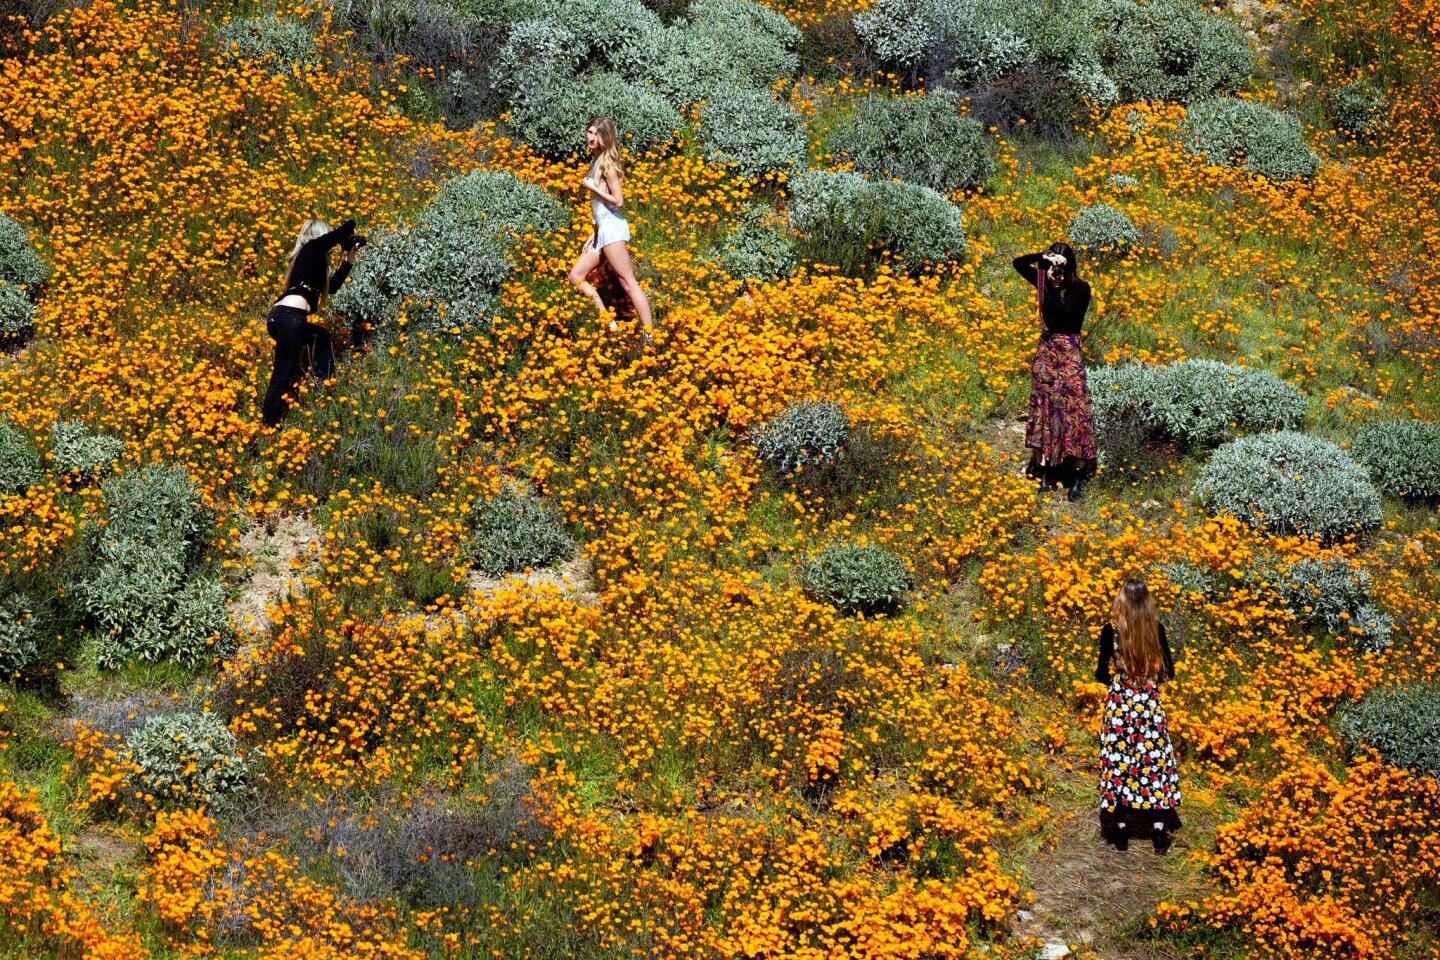 Floral-pattern clothes go with the theme in Walker Canyon, where visitors snap photos.